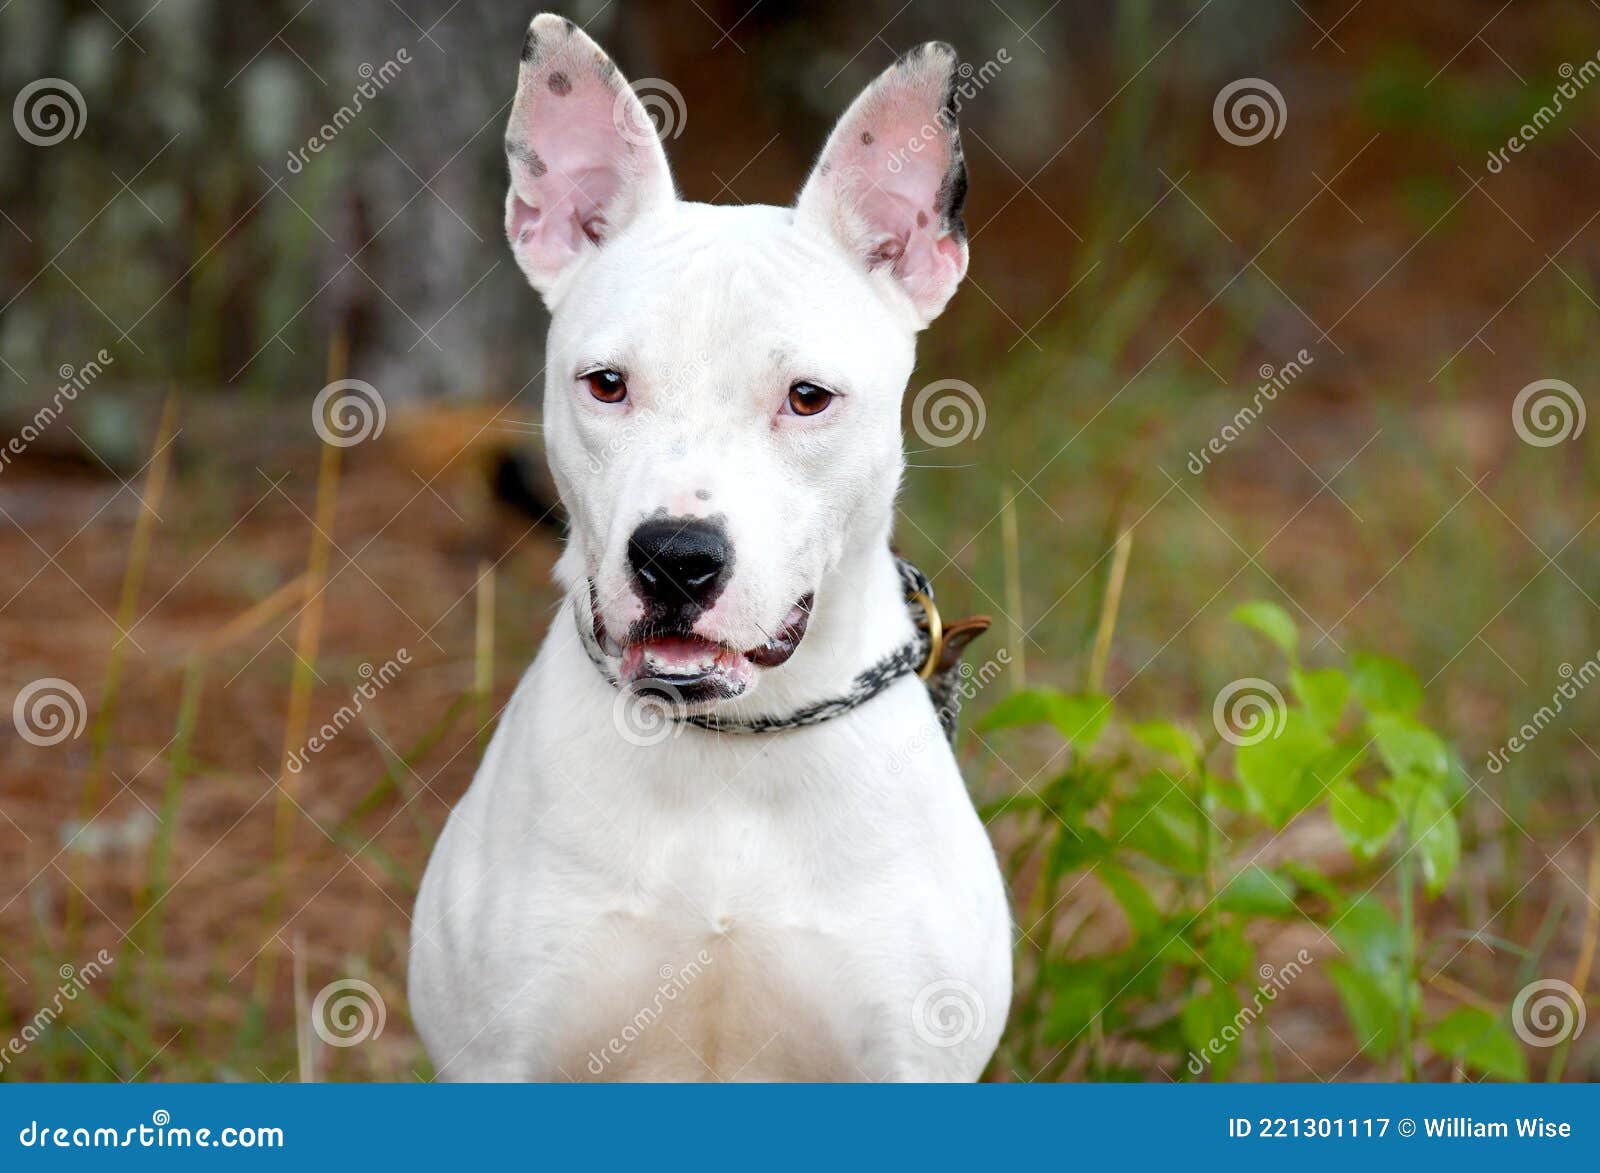 what terrier is mix with pit bull